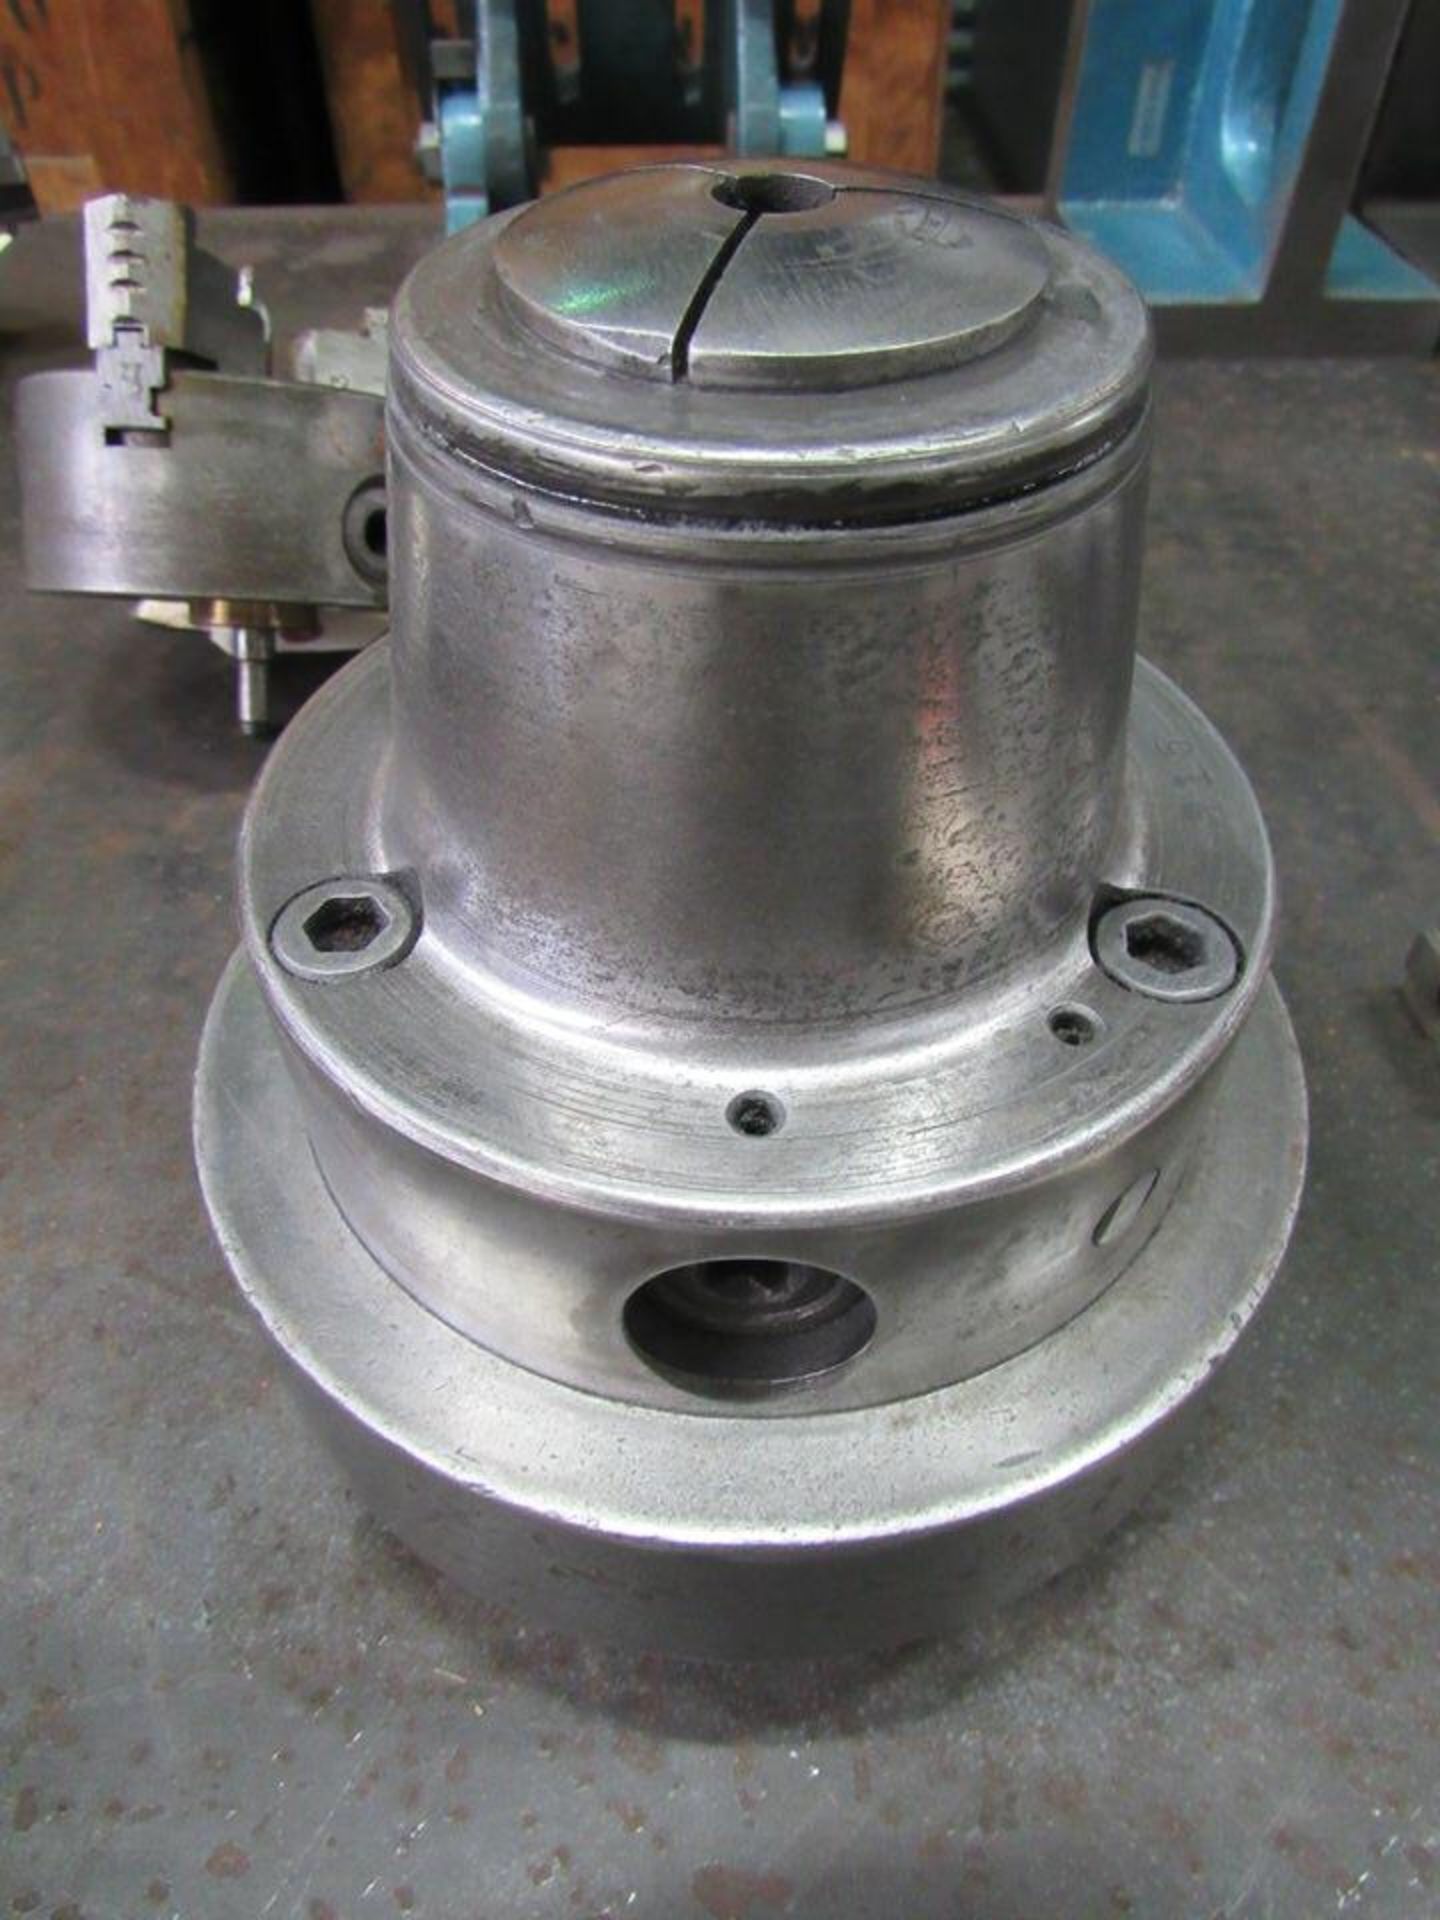 7" Collet Chuck, 1/2" collet, camlock back, S/N NA (LOCATION: 3603 Melva Street, Houston TX 77020) - Image 2 of 4